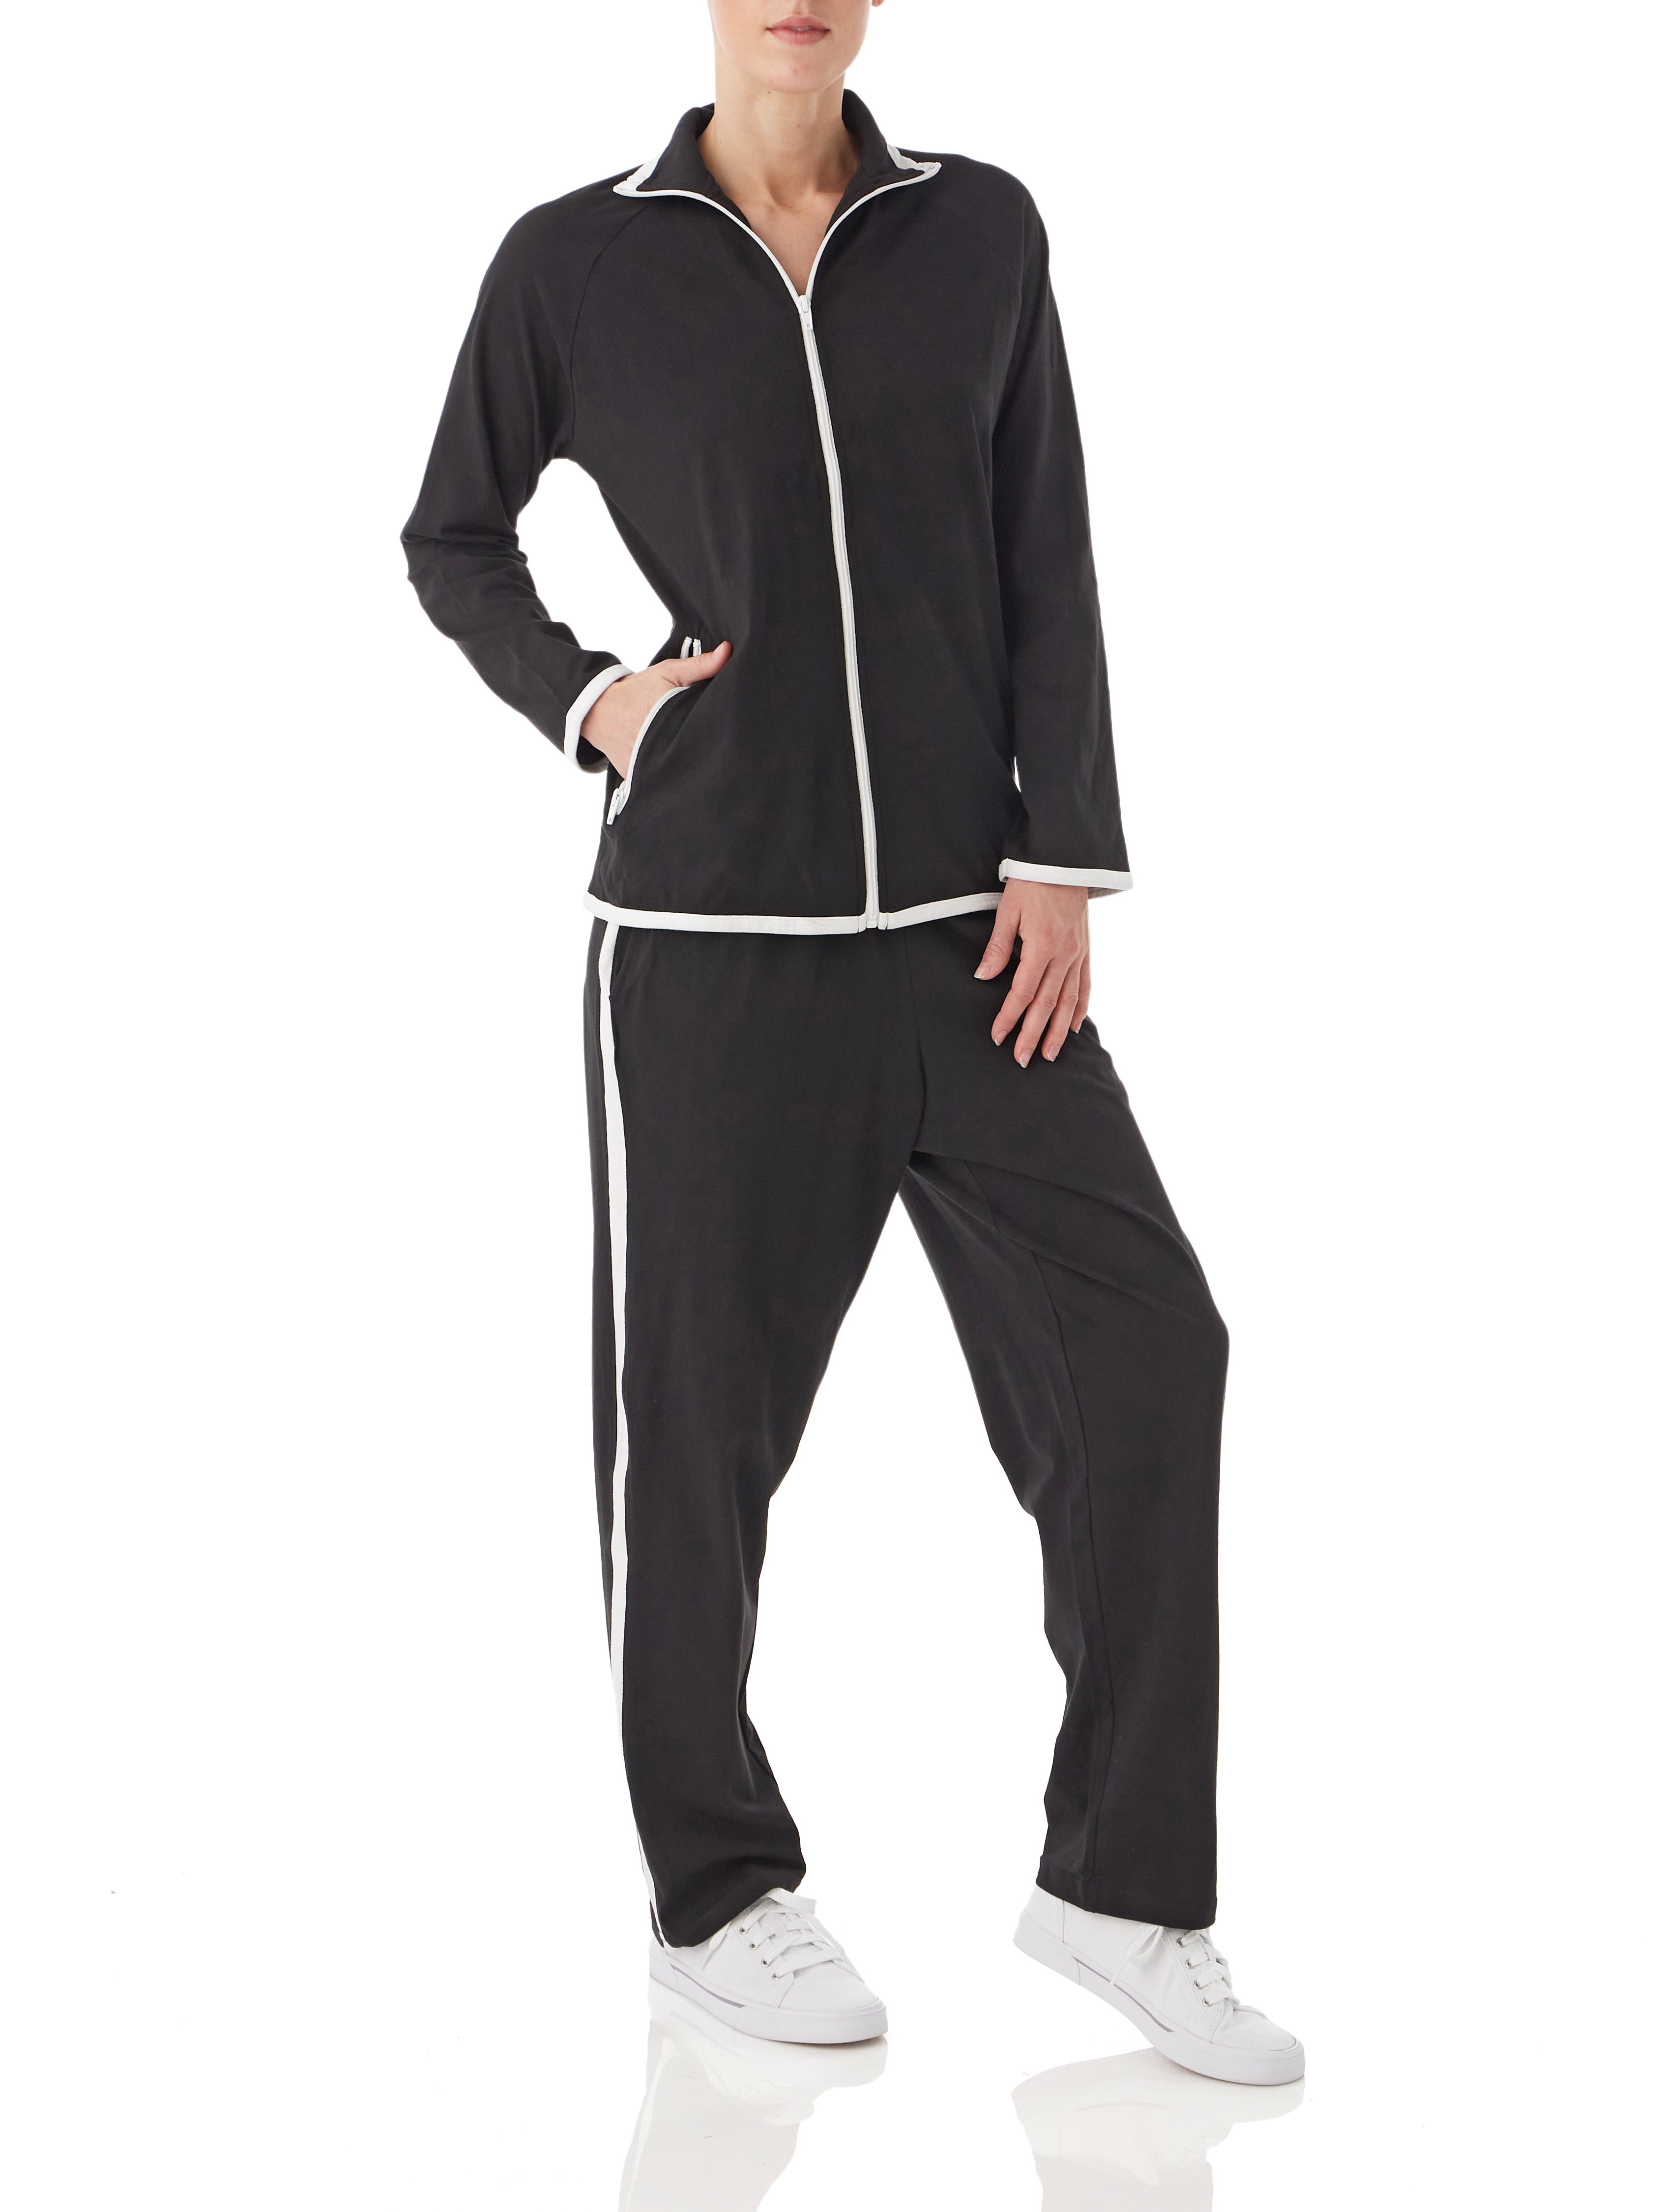 Women’s Striped Sweat Suit Set 100% Cotton Pants and Jacket Outfit 